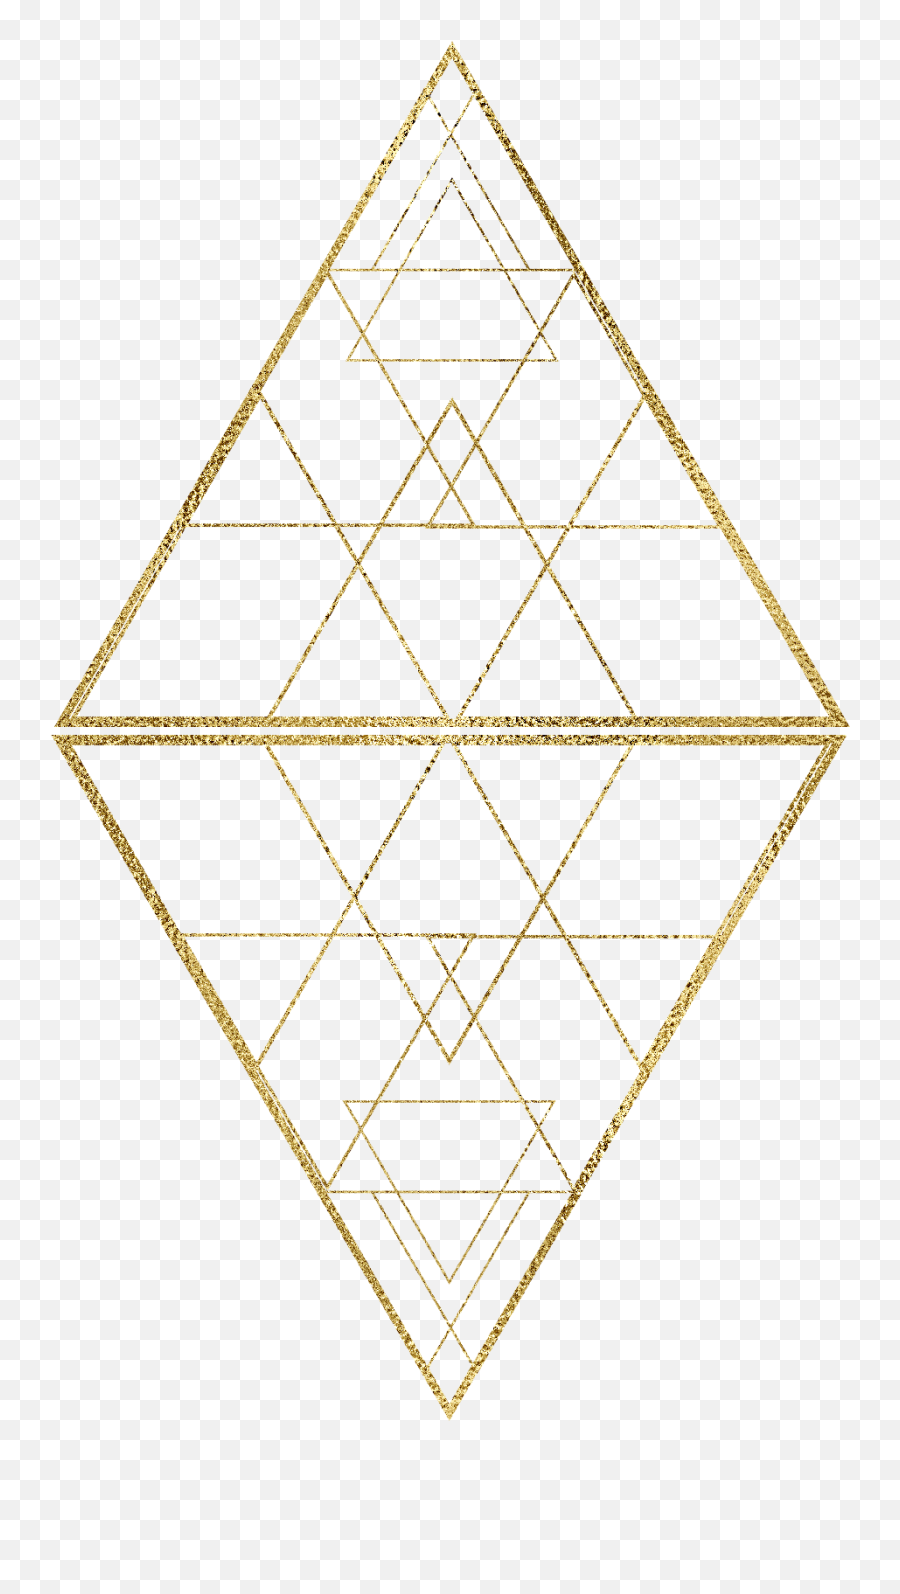 Golden Hd Image Free Png Clipart - Triangle,Triangle Pattern Png